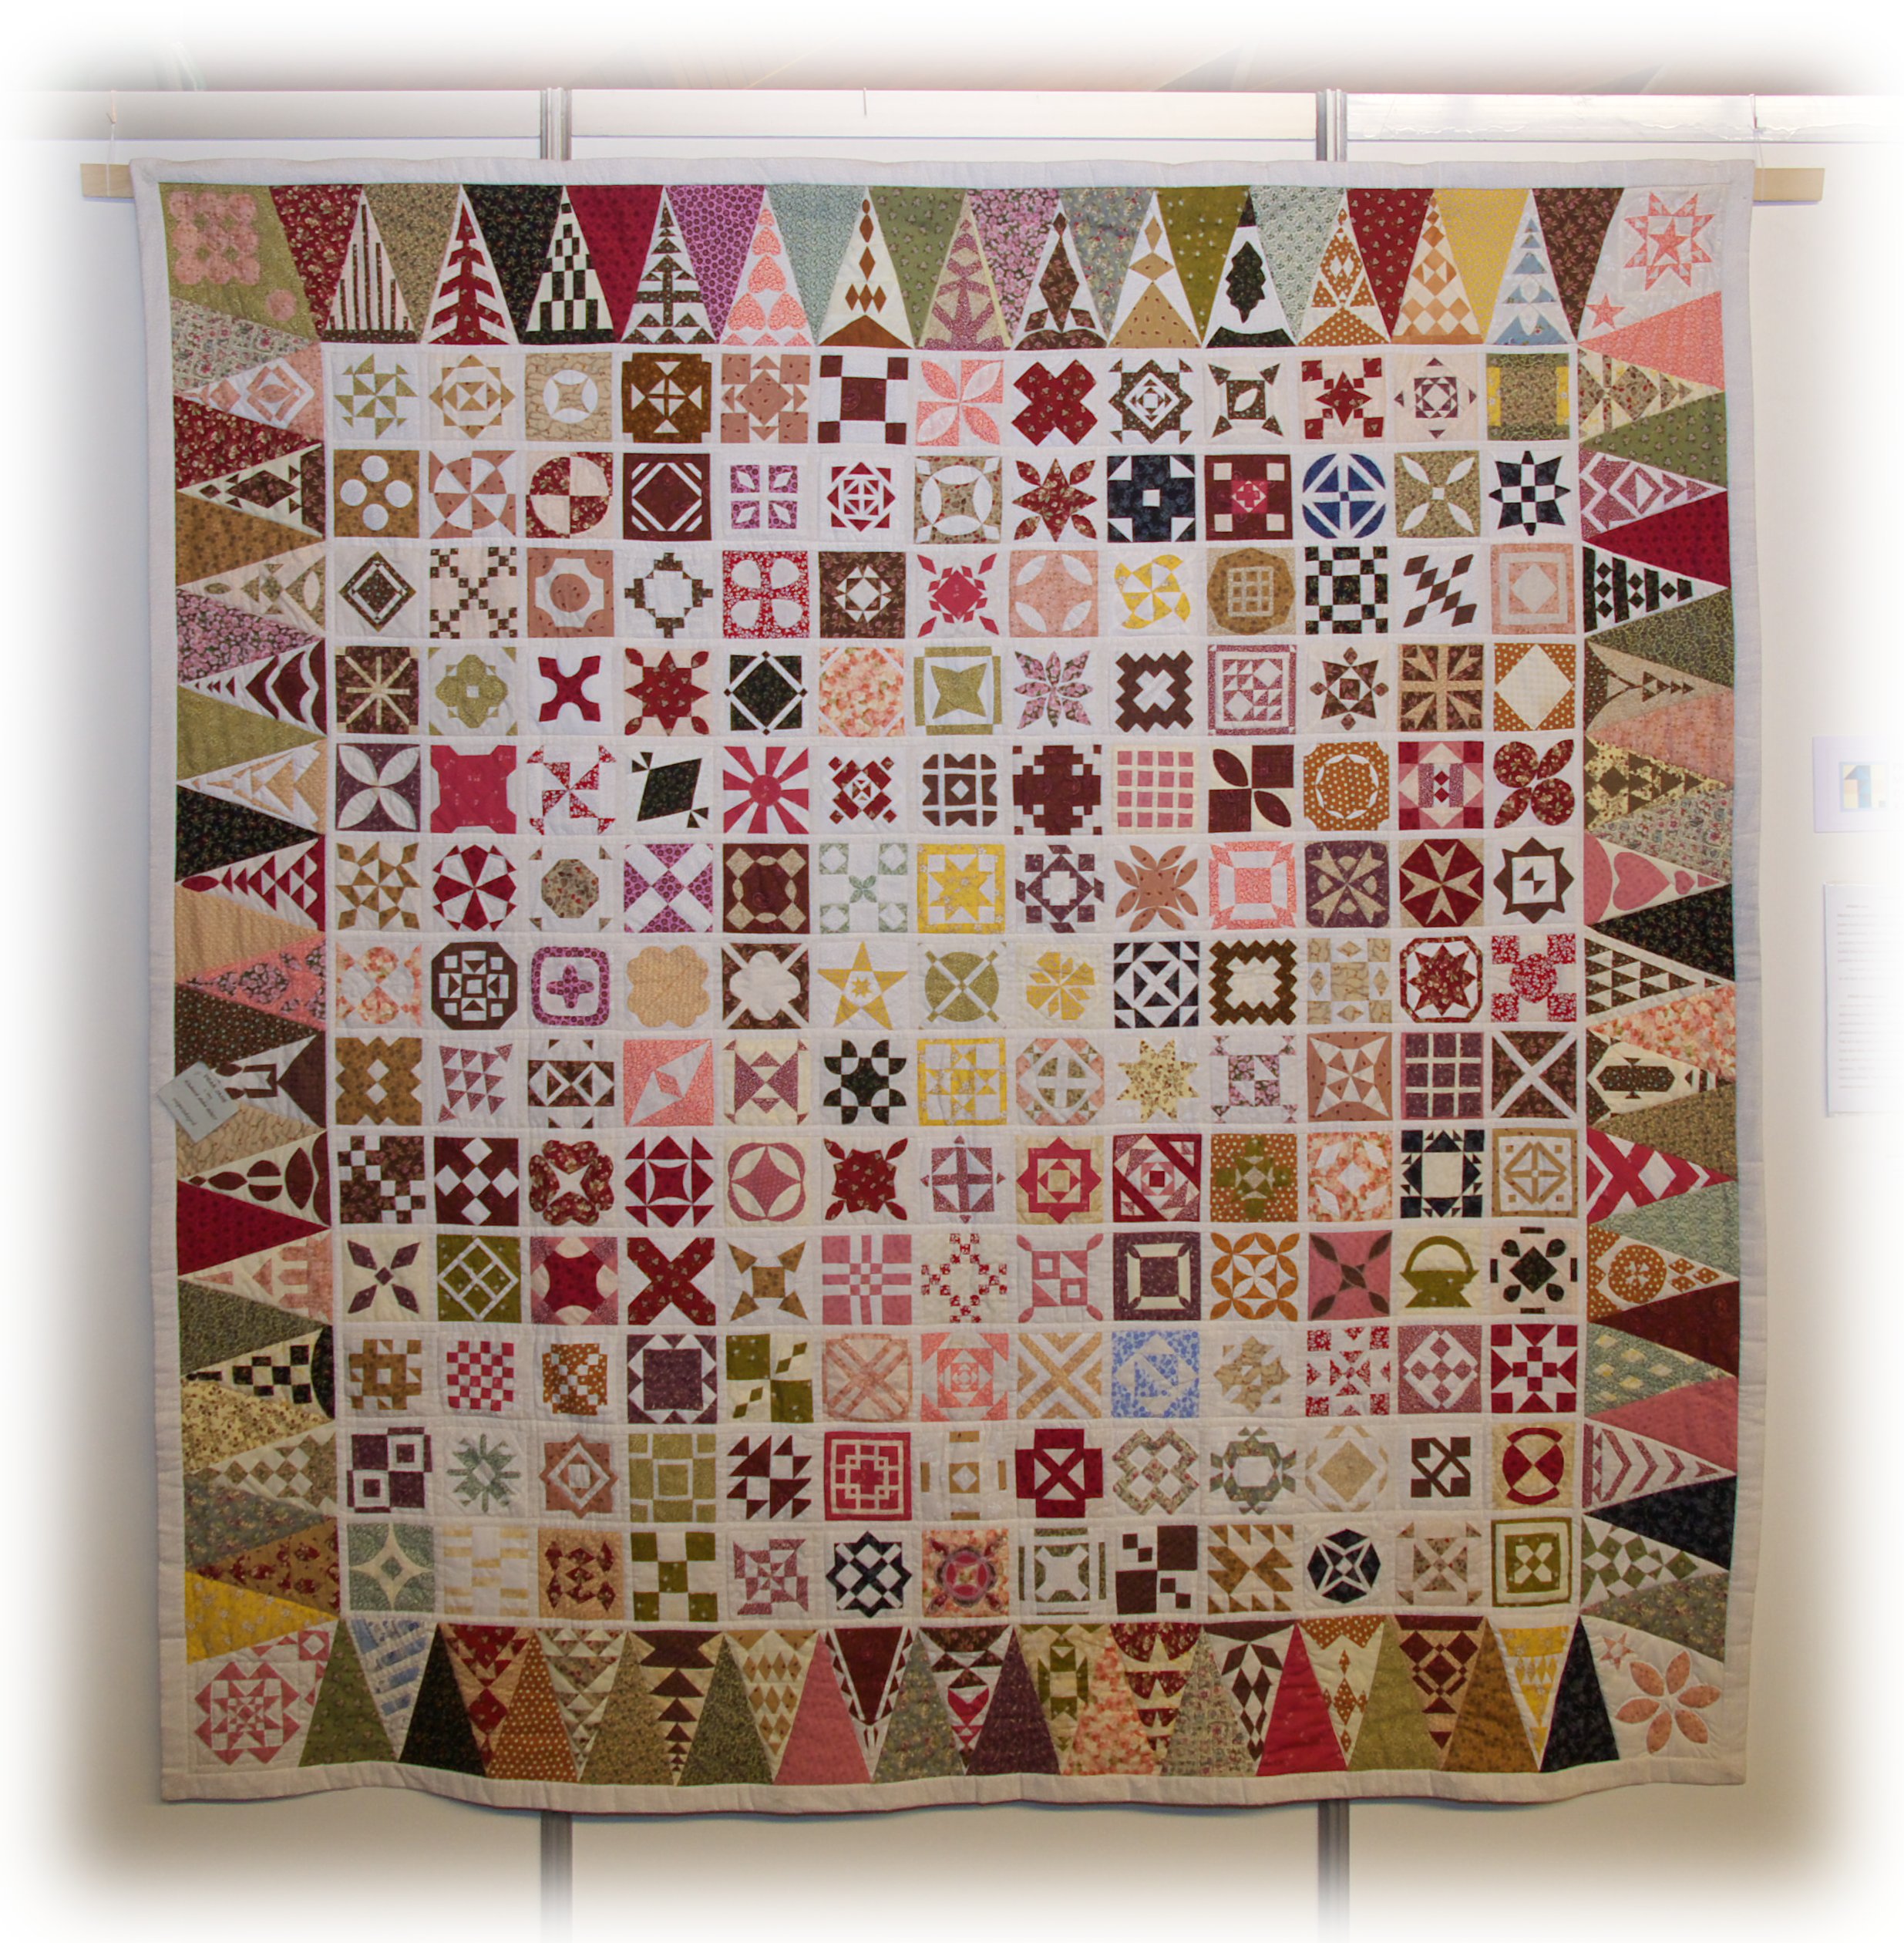 This photo shows a modern quilt created to resemble and pay tribute to the 1863 quilt created by Jane Stickle.